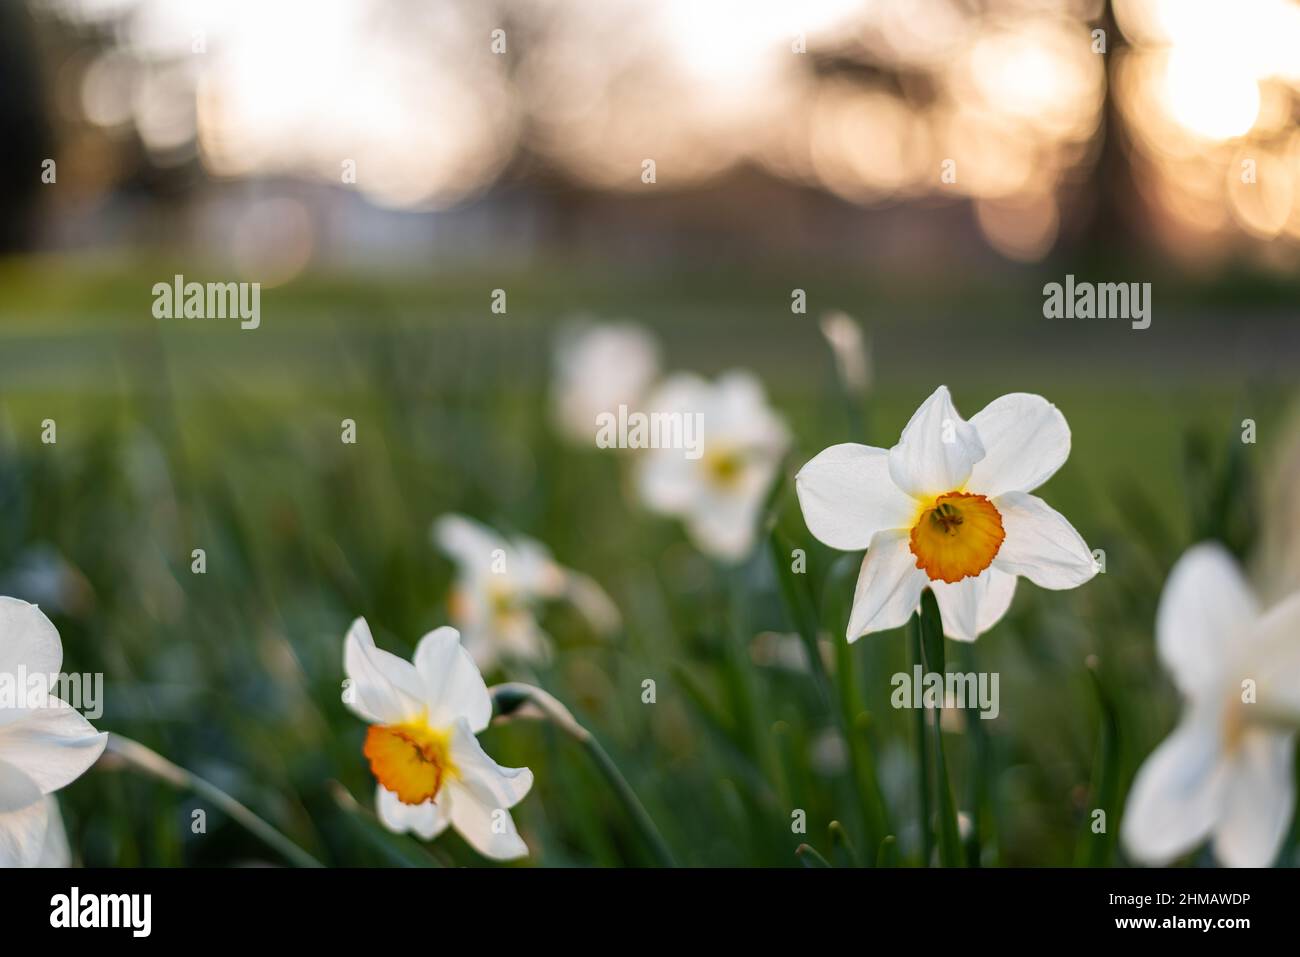 View on beautiful white flower between grass, sunset at background Stock Photo